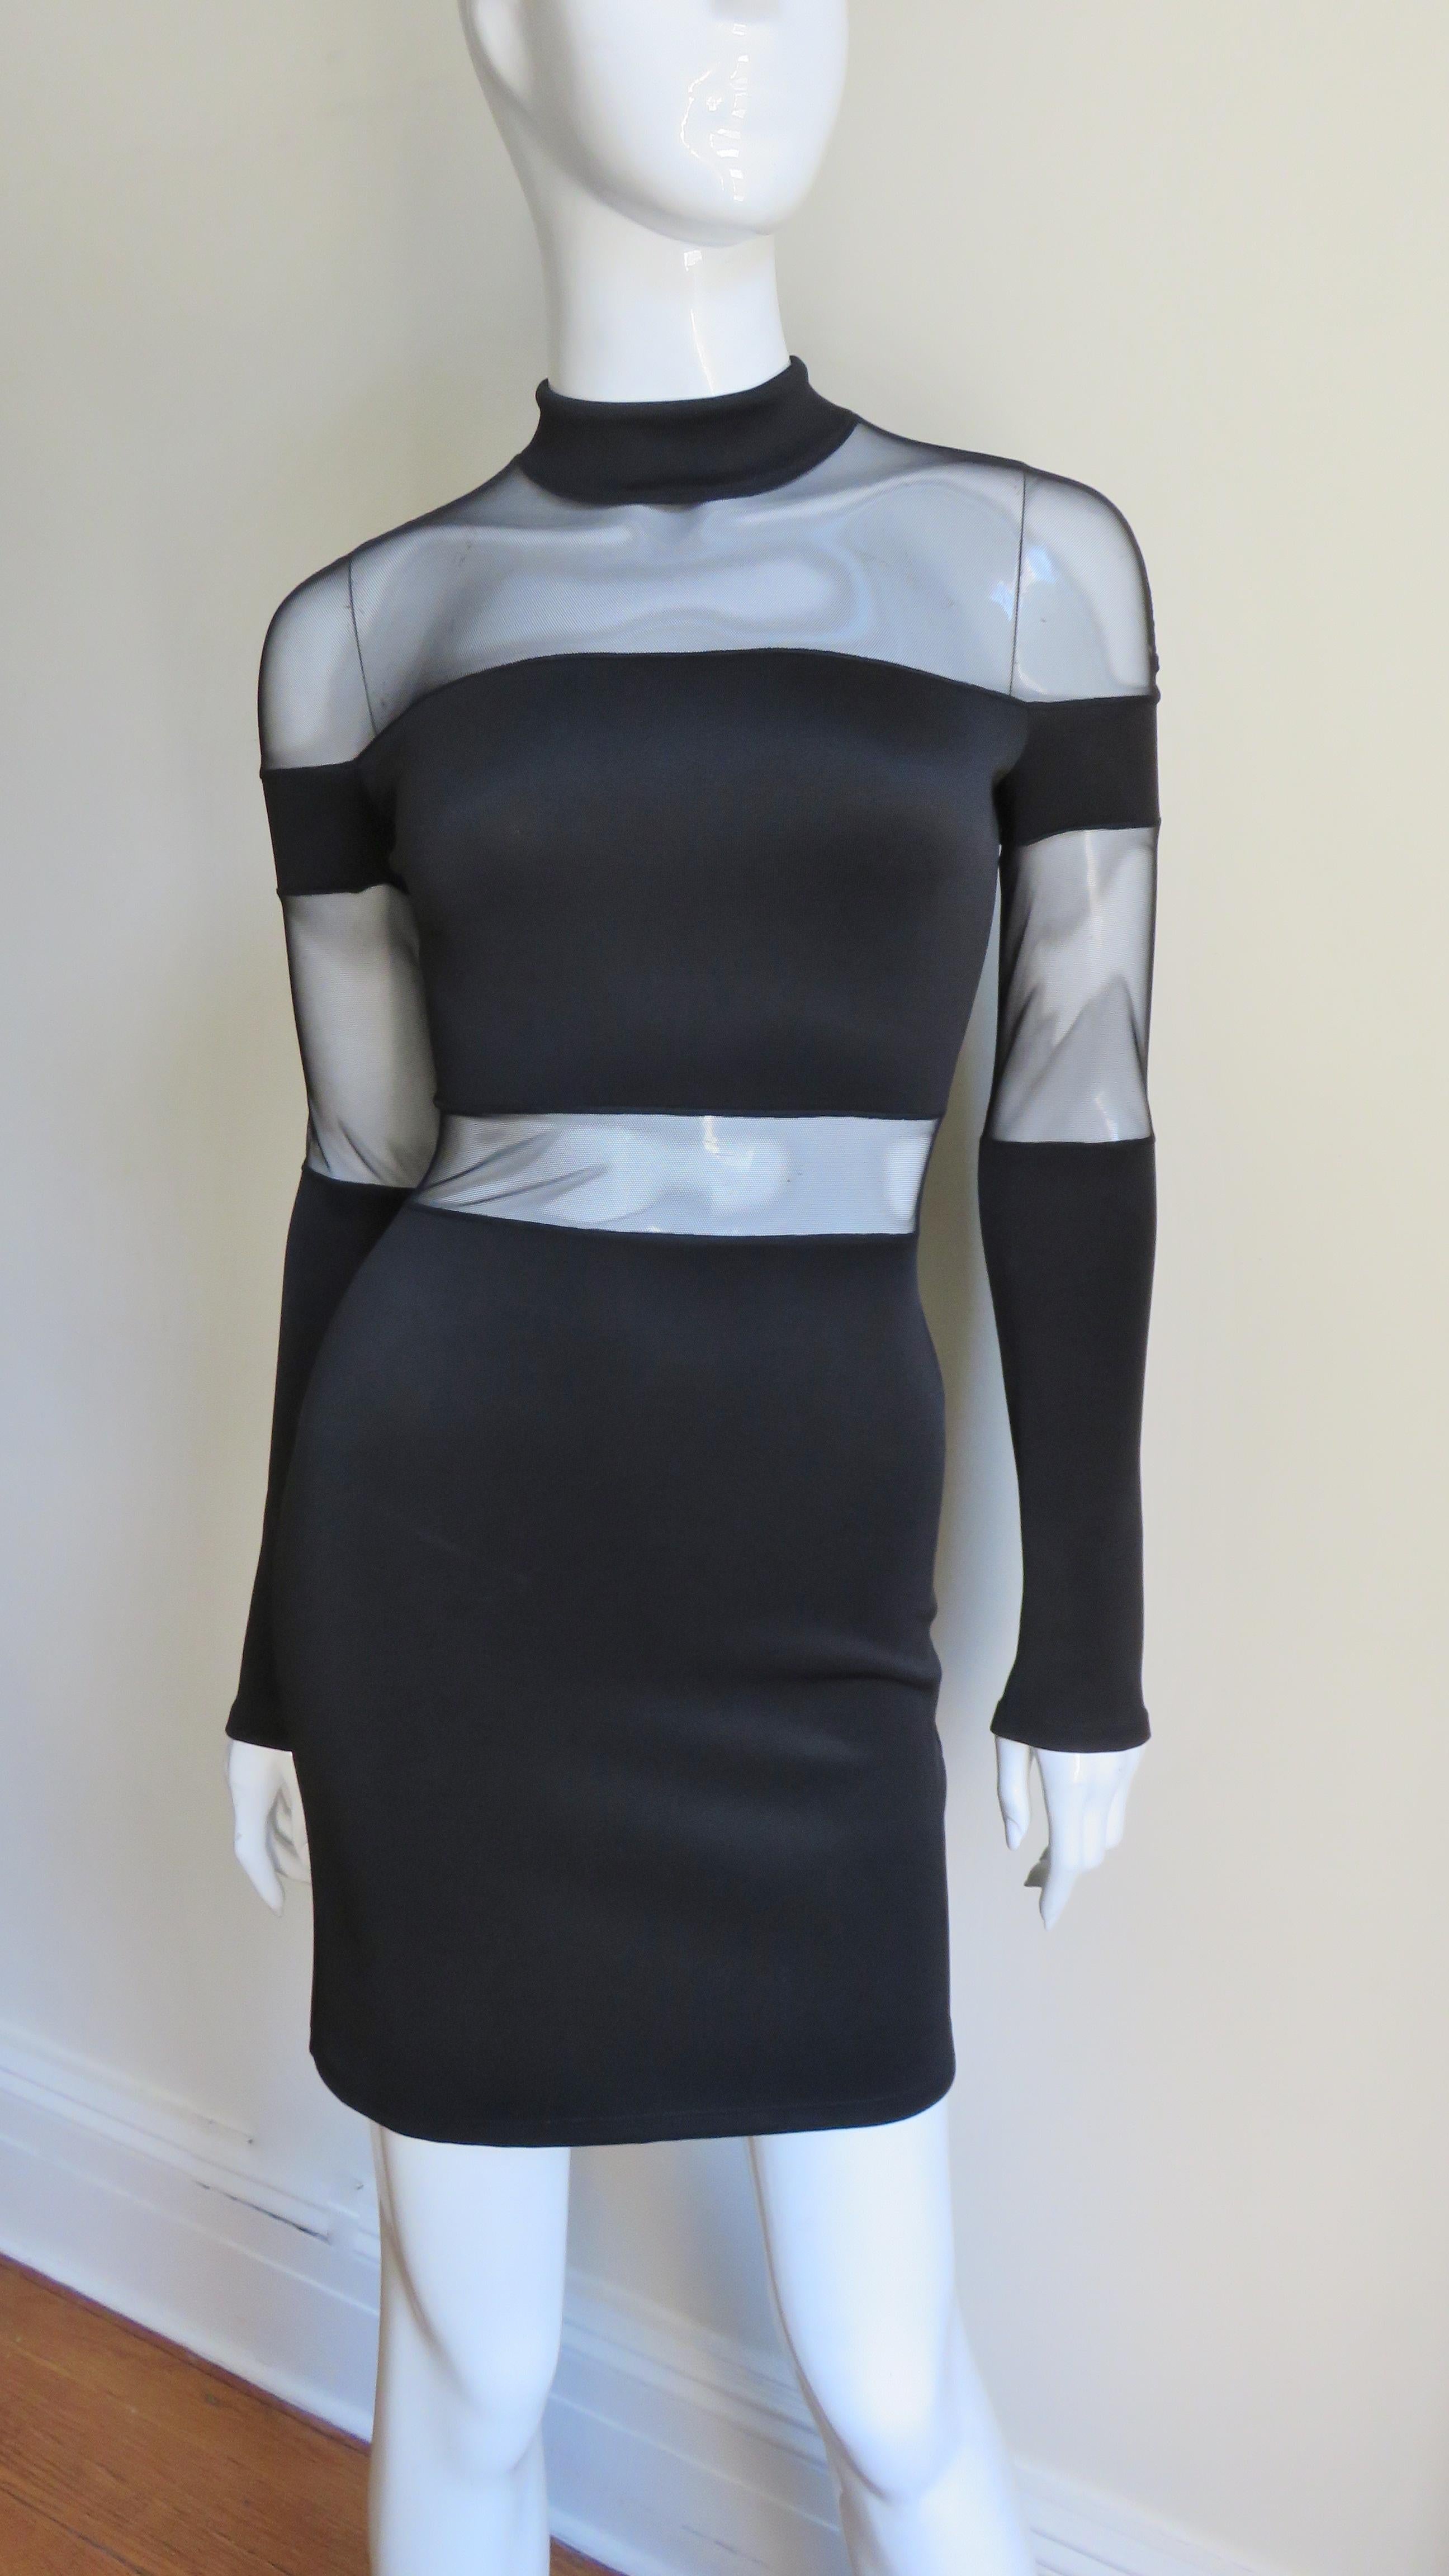 A gorgeous black bandage dress from Pierre Balmain. It has a stand up collar, long sleeves and is fitted through to the hips. There are fabulous horizontal sheer panels around the shoulders, upper arms and waist.  Very dramatic.  It closes with a